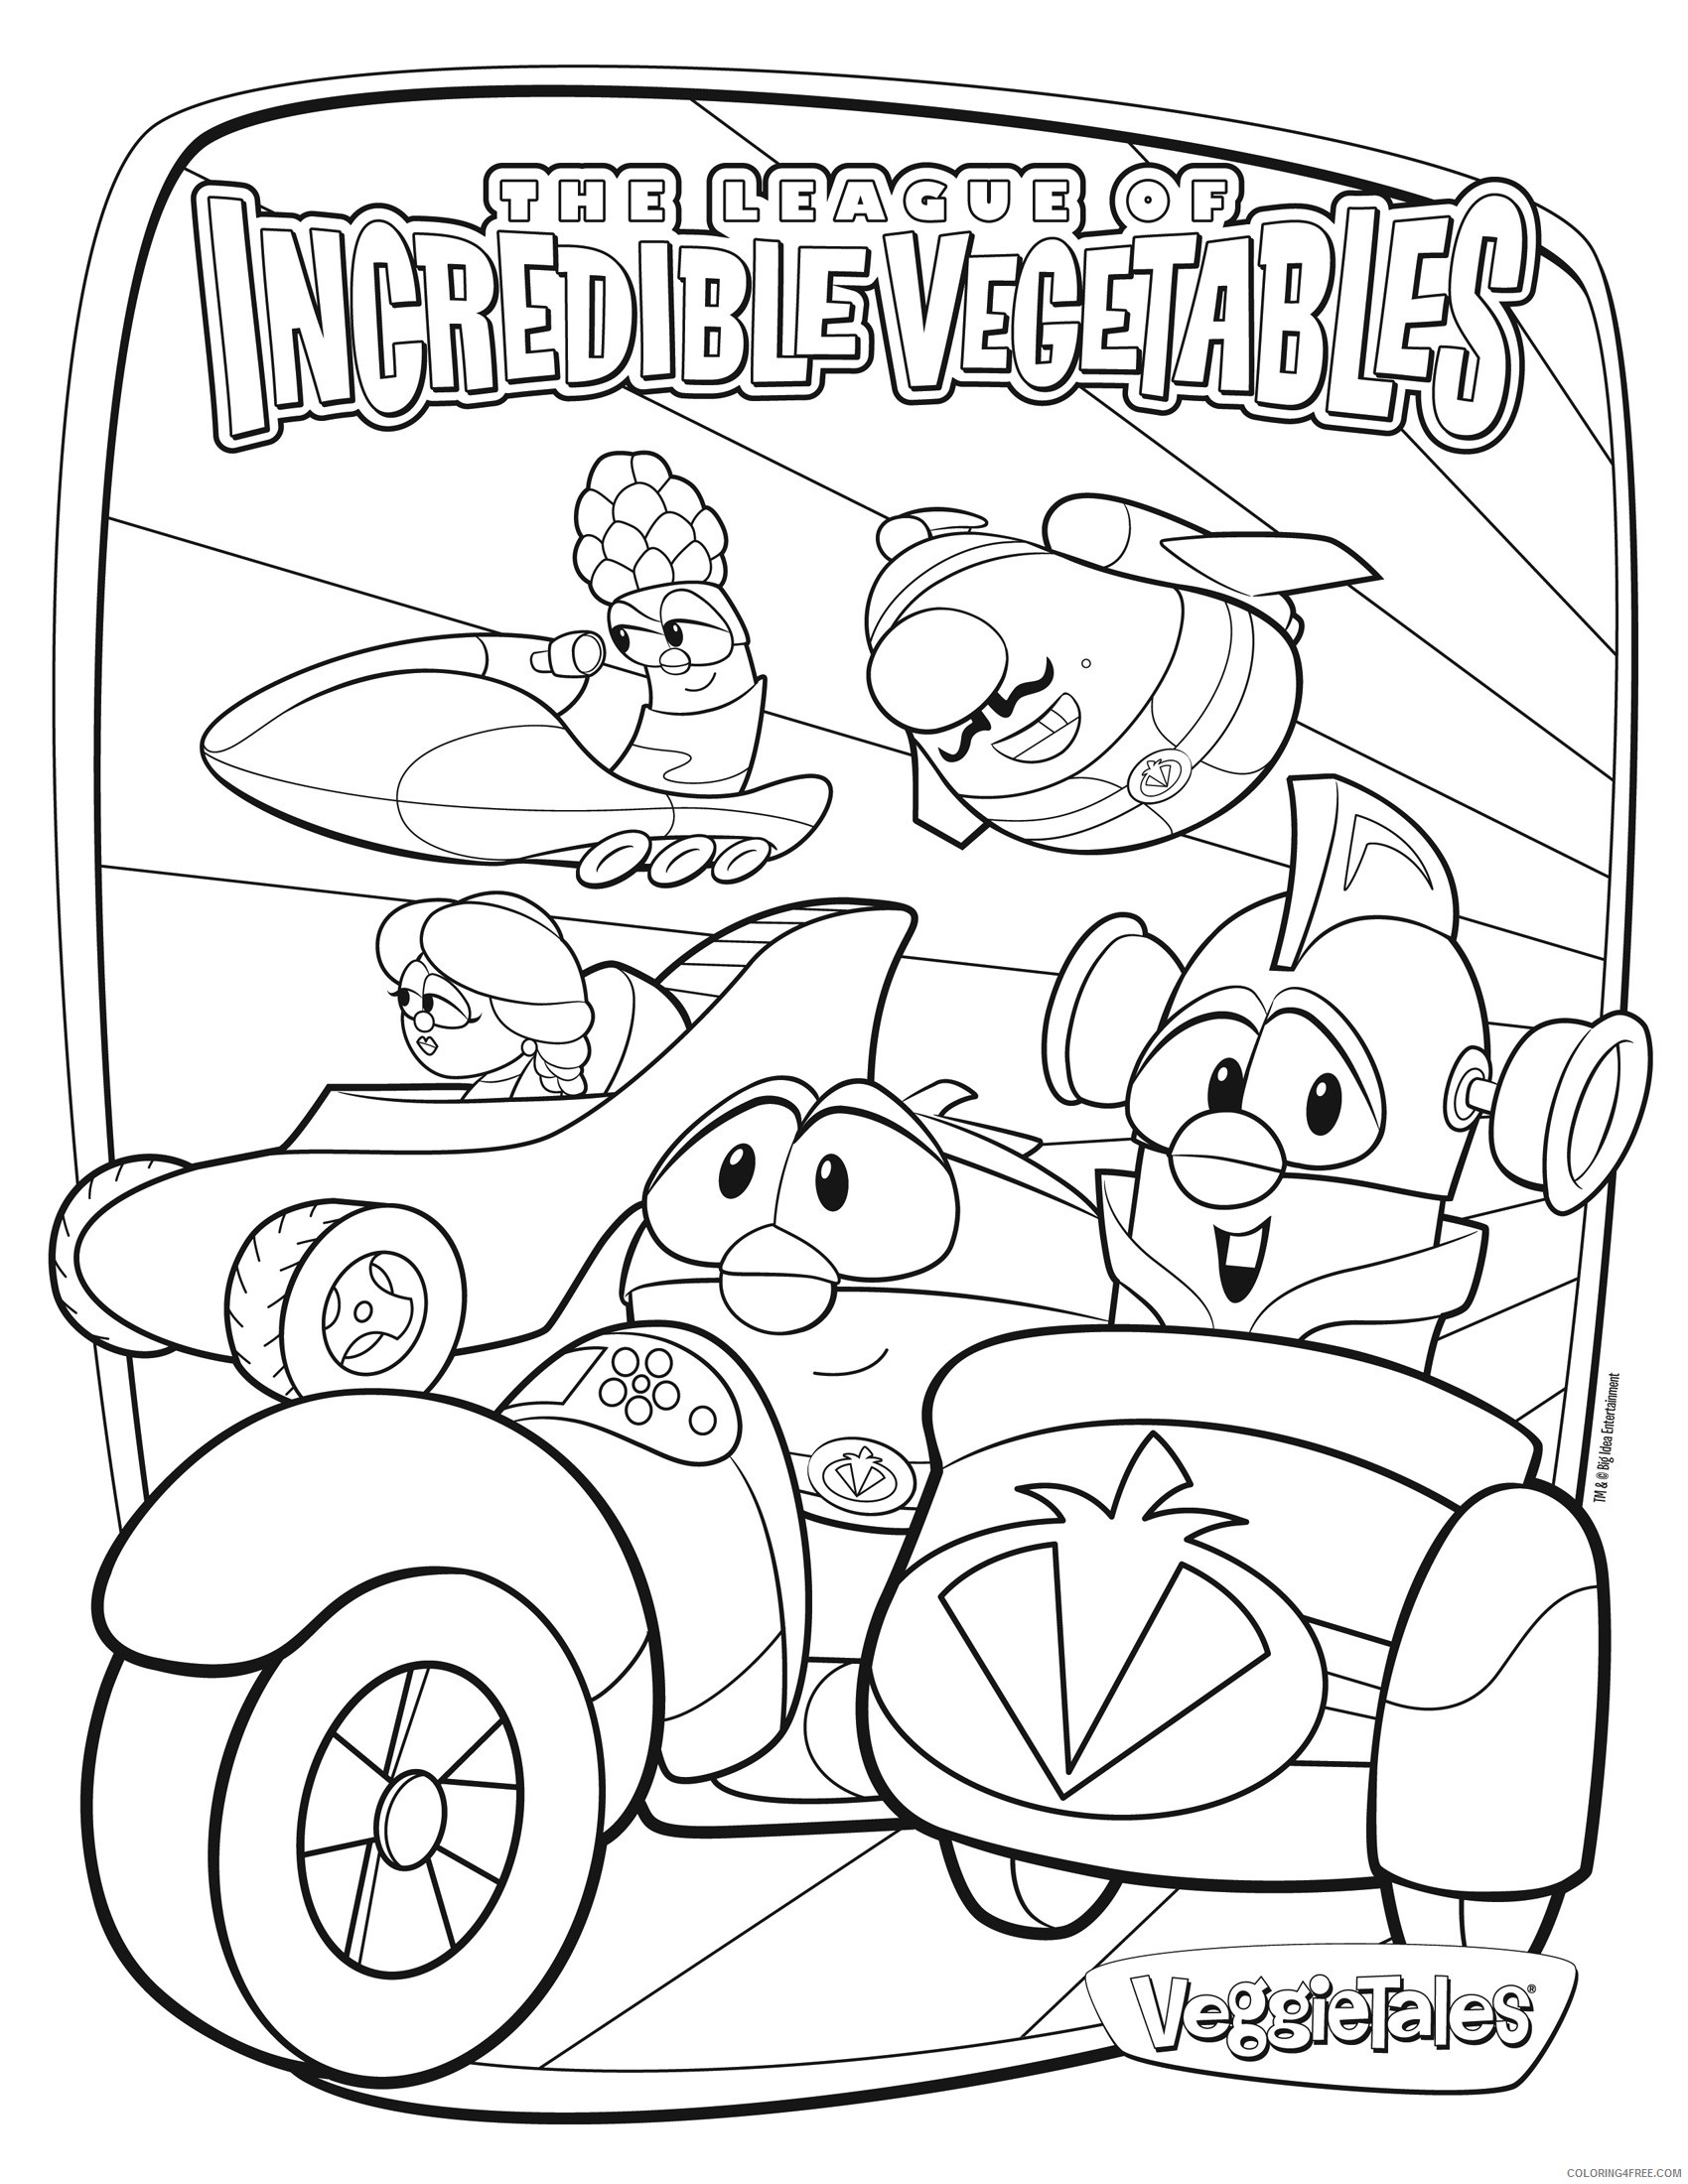 veggie tales coloring pages incredible vegetables Coloring4free